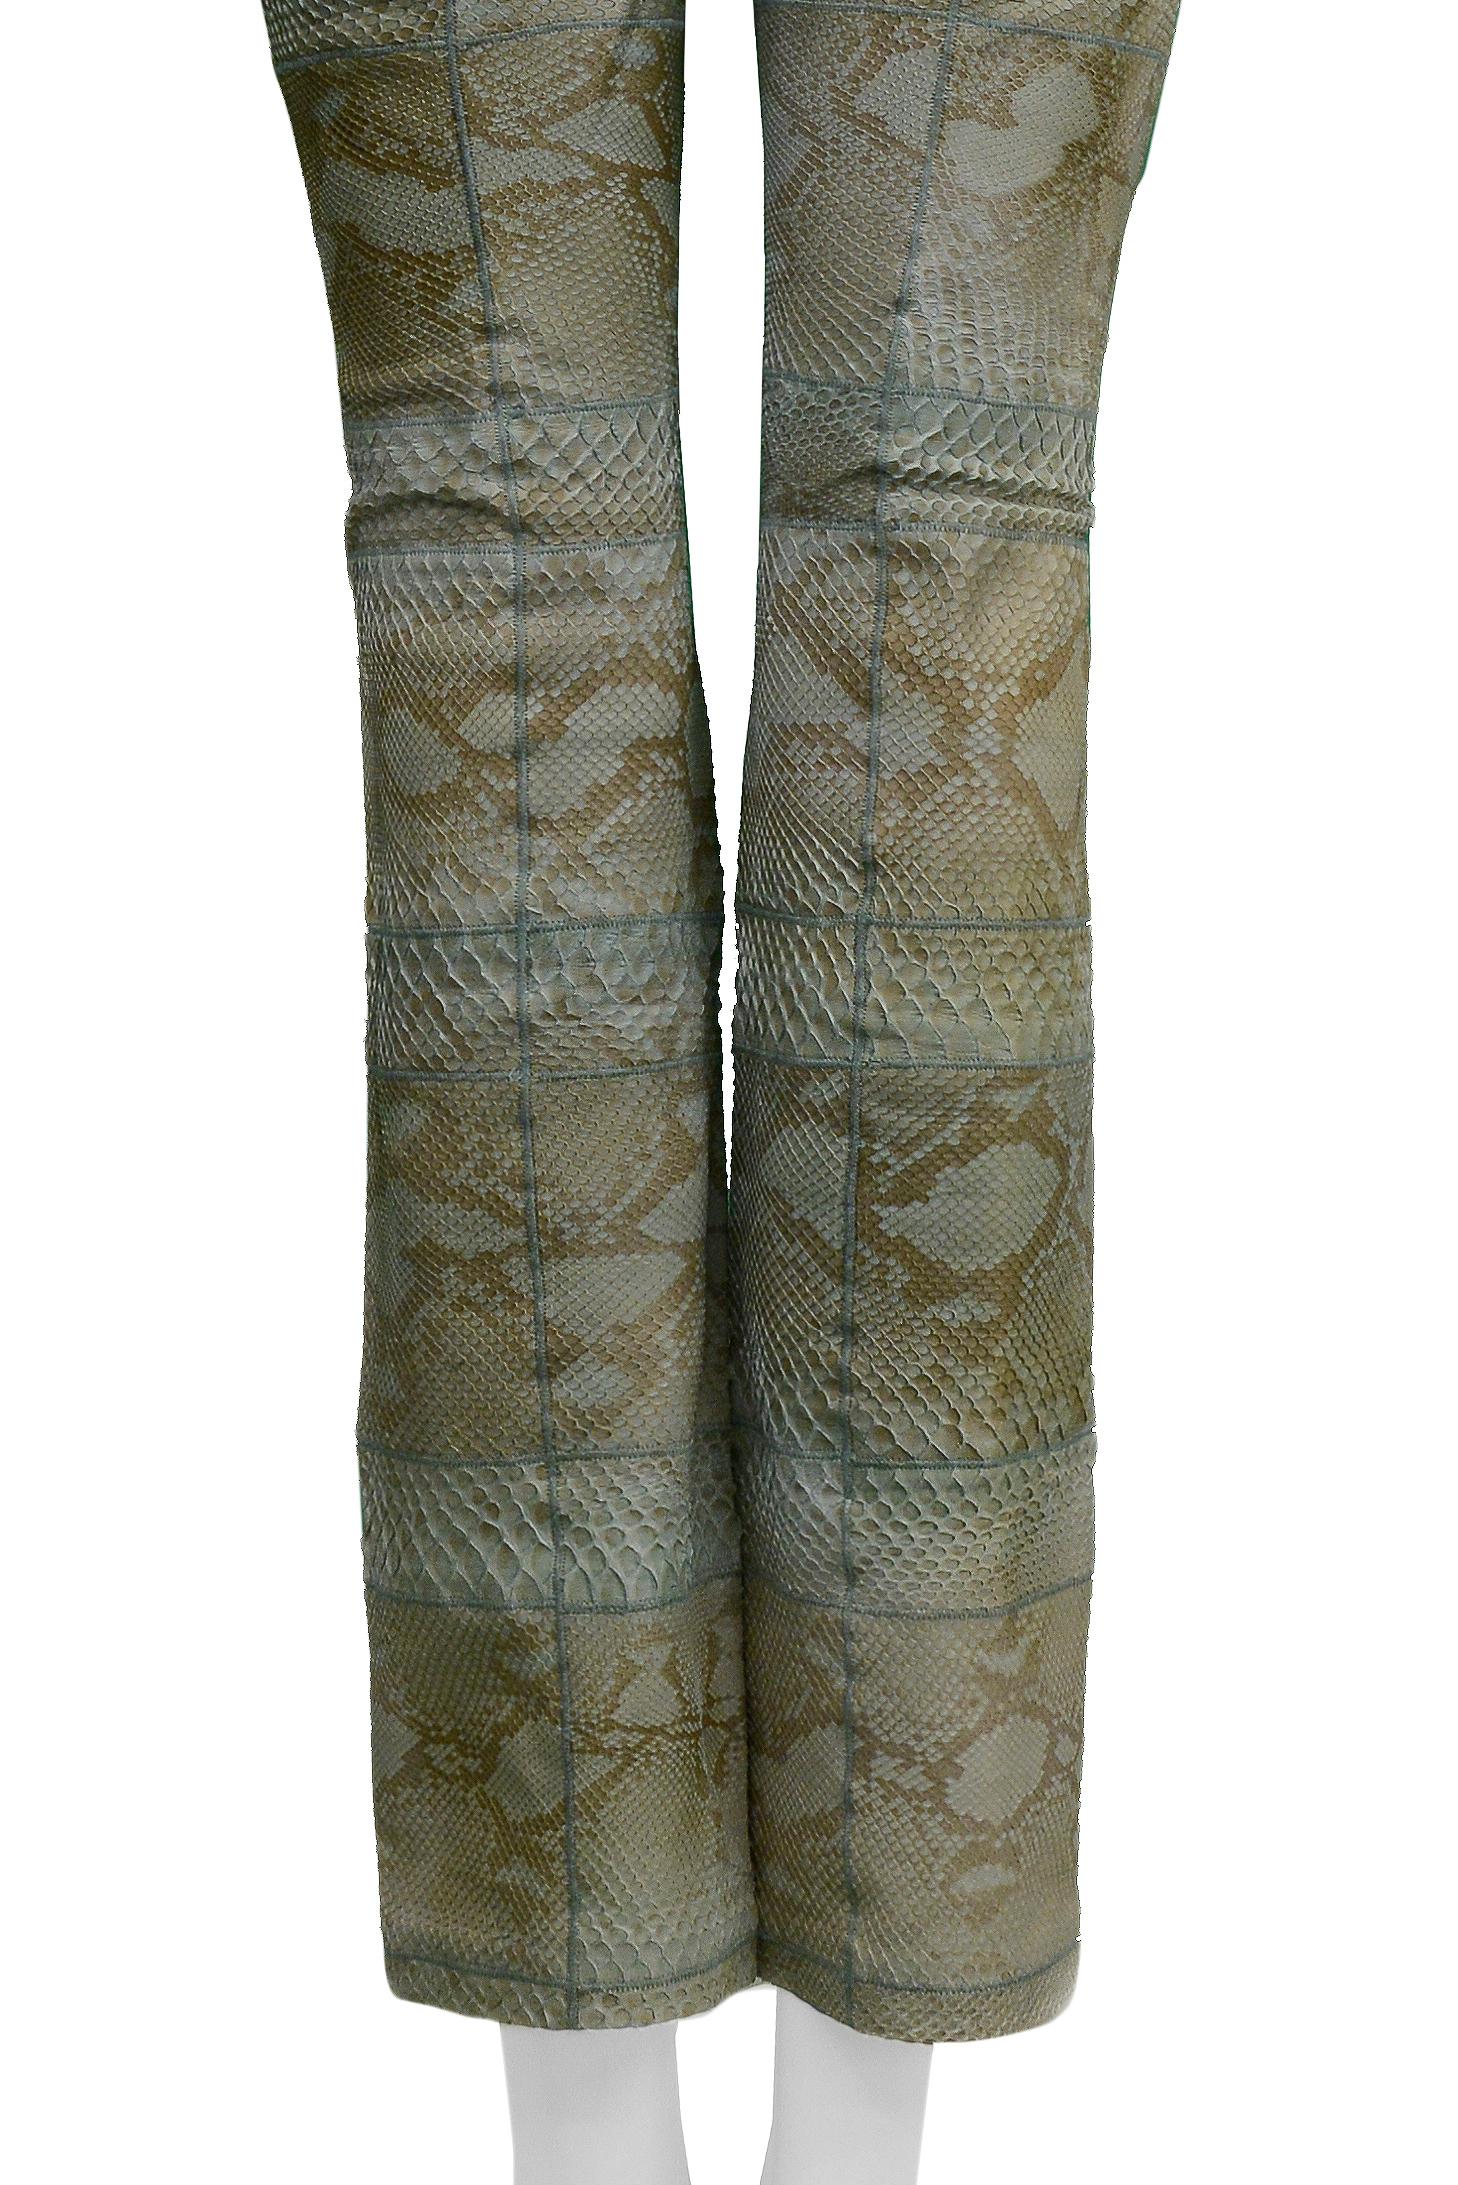 Iconic Versace Couture Turquoise Blue Python Leather Pants  Runway 1999 In Excellent Condition For Sale In Los Angeles, CA